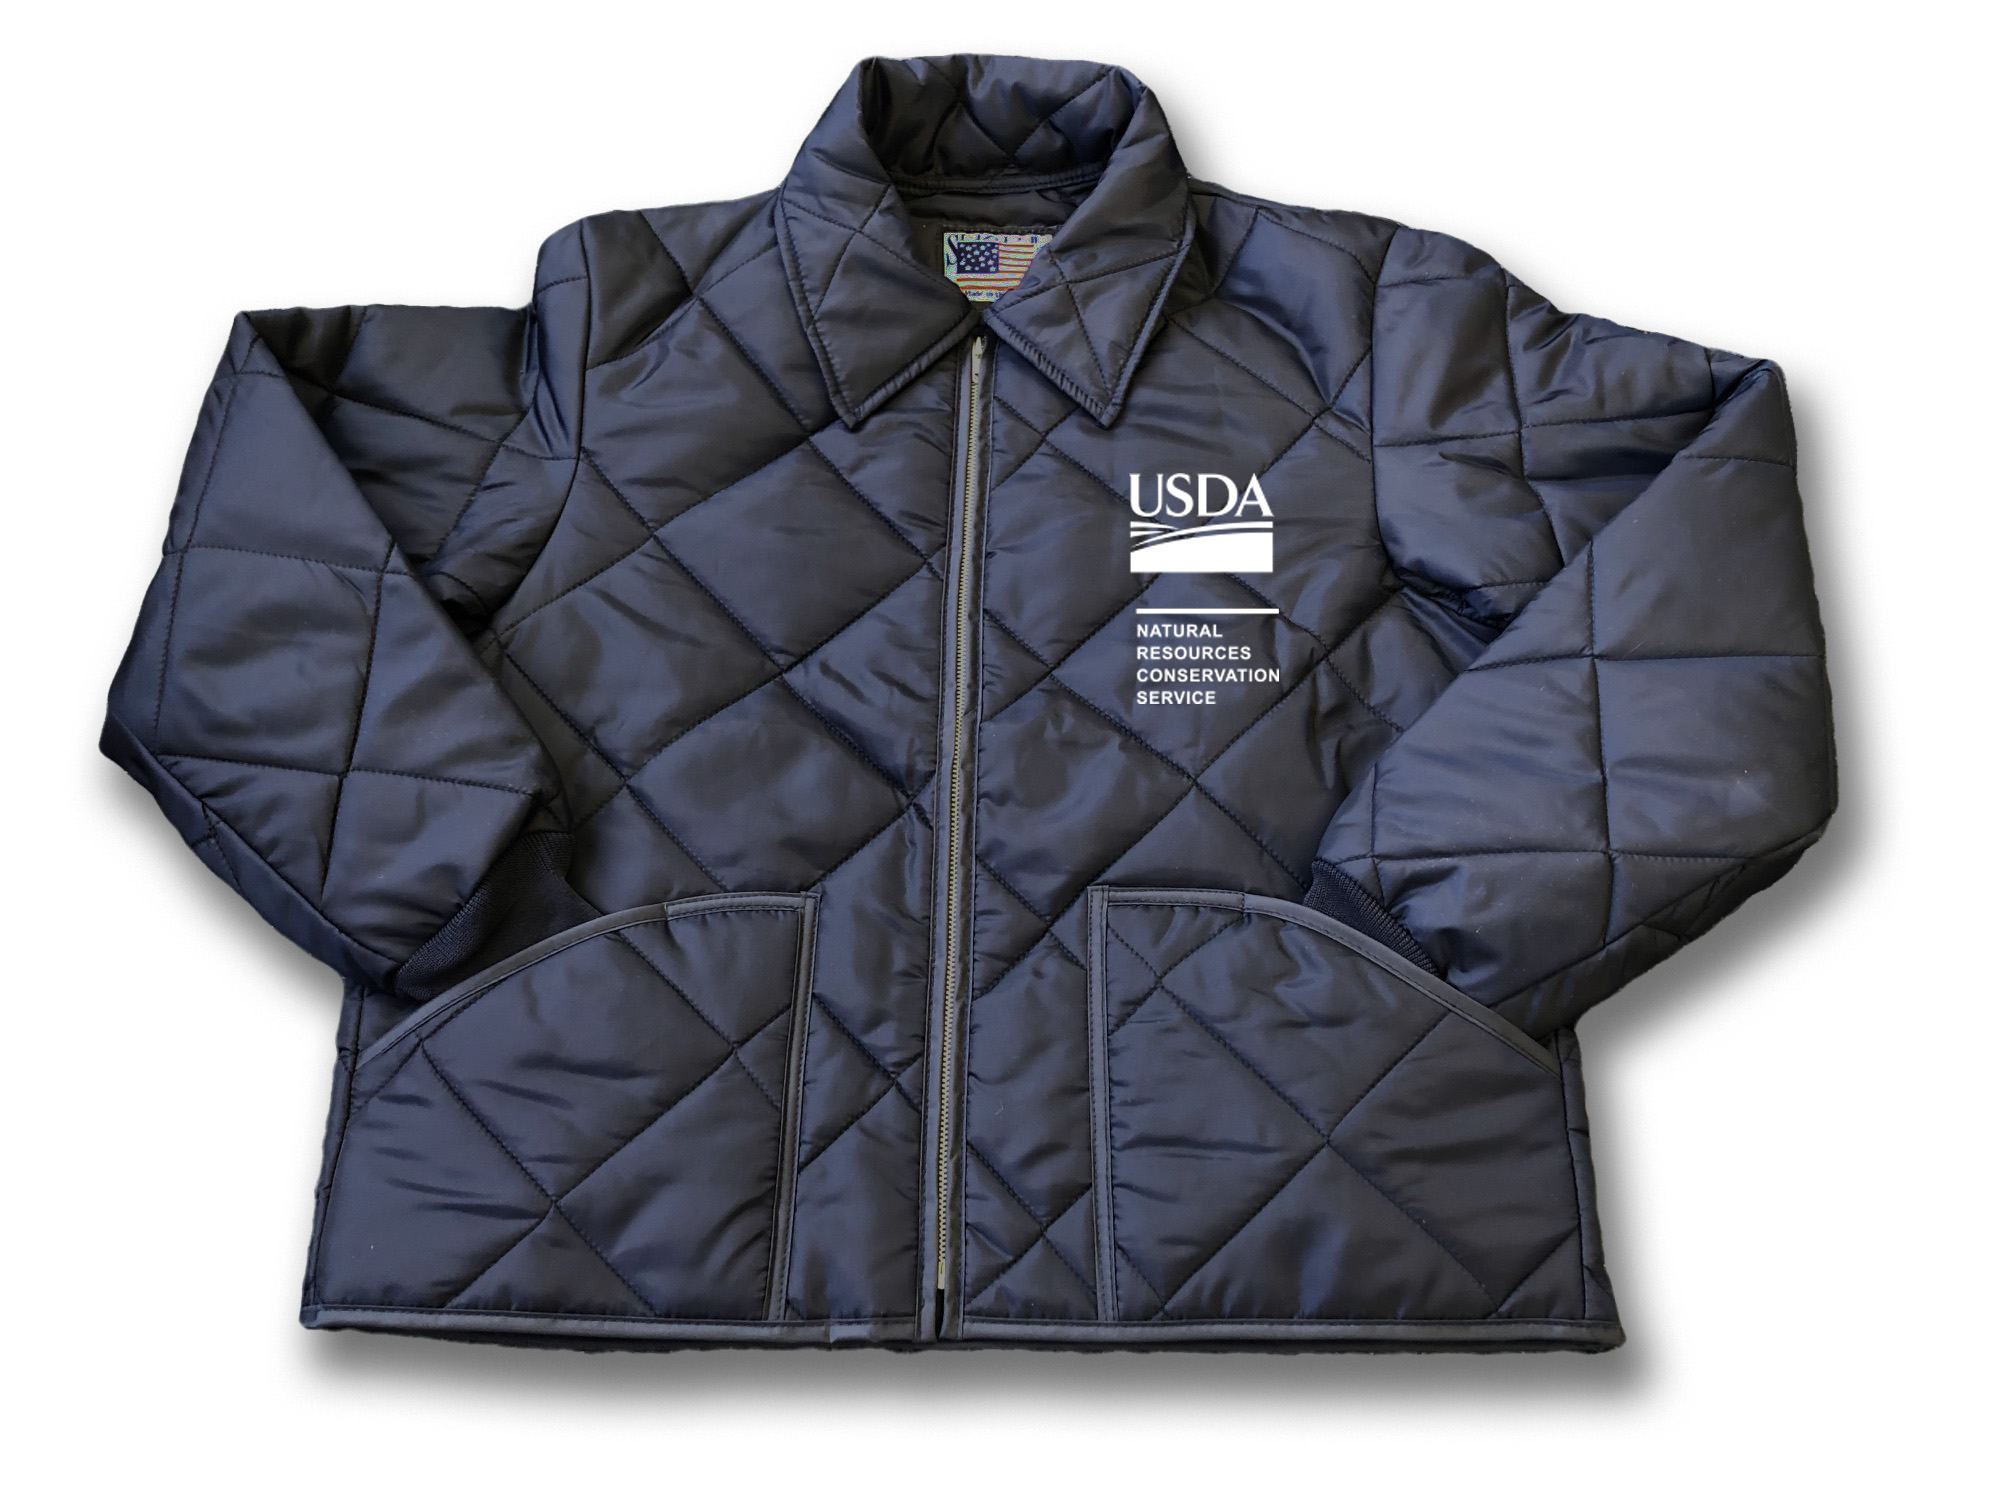 Jackets, Quilted USA - AG423-AG